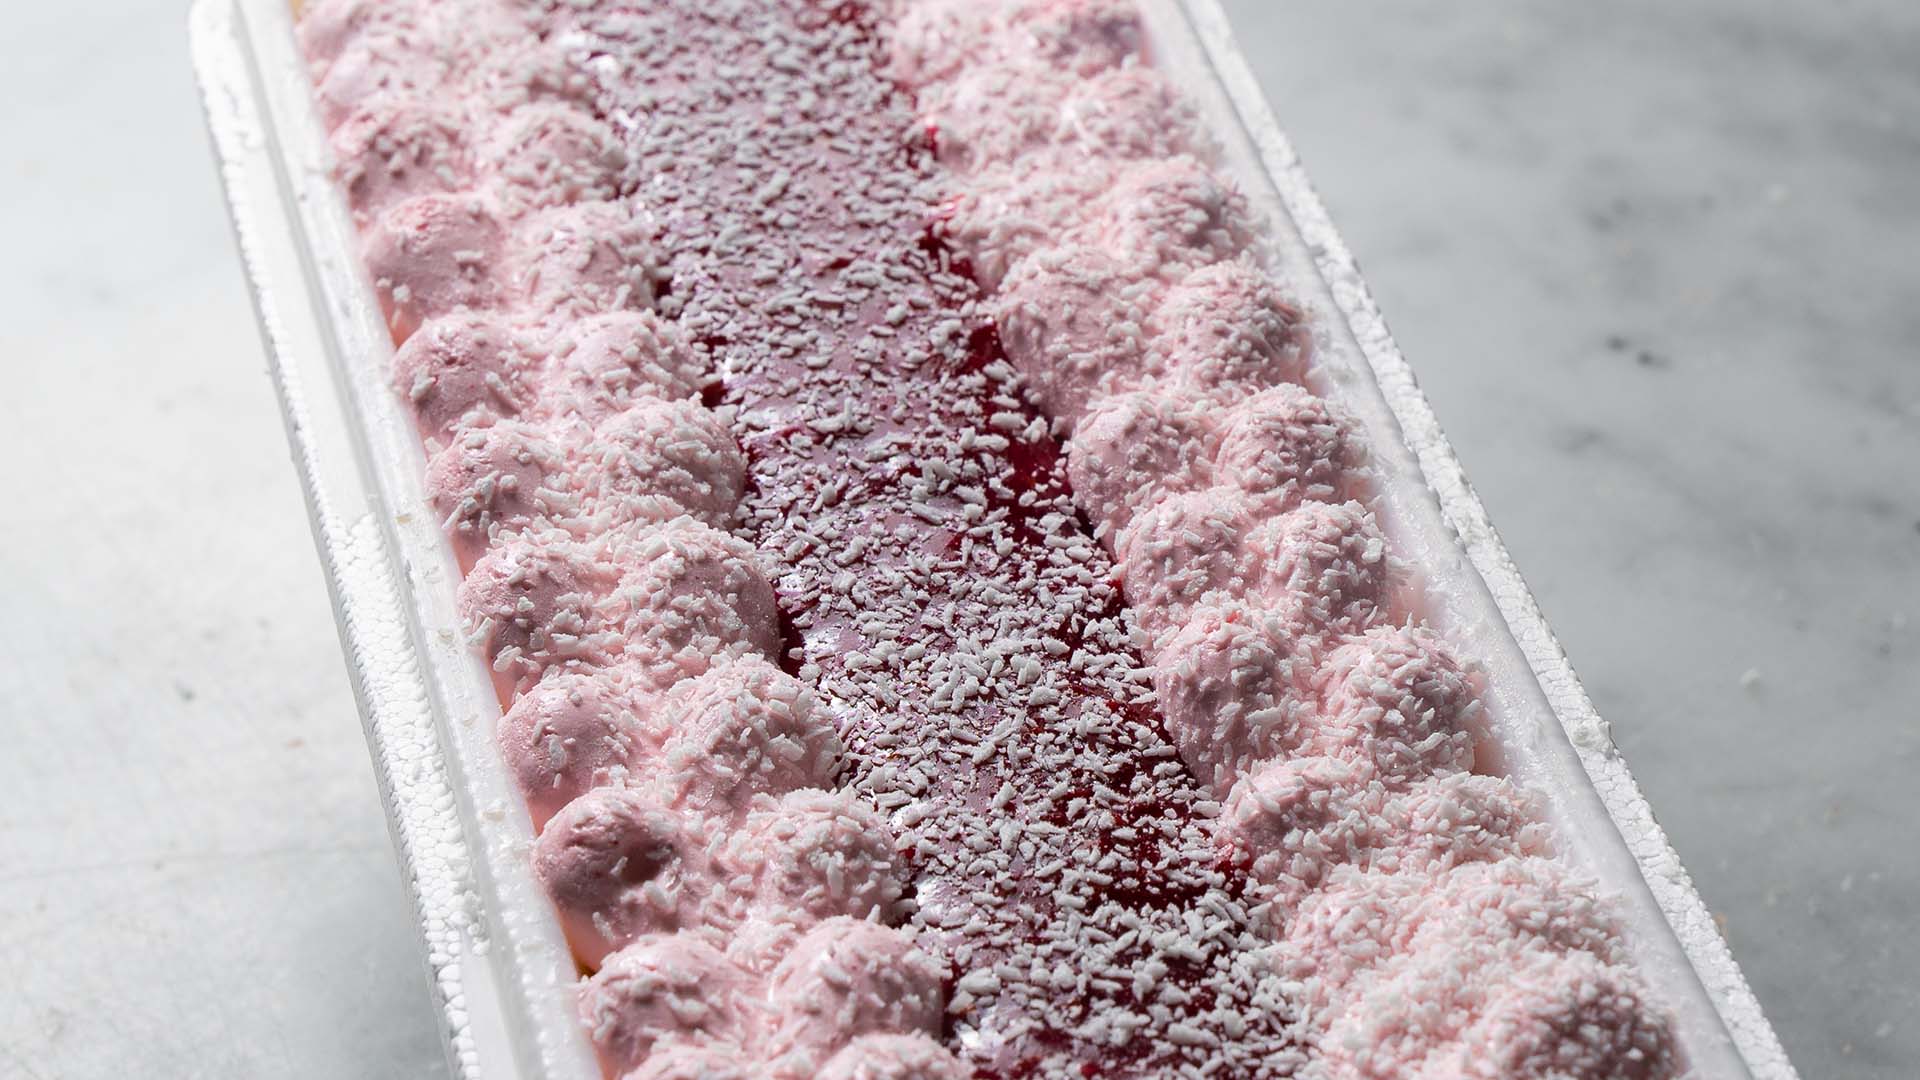 Iced VoVo Gelato Is the Indulgent New Messina Flavour You Can Order by the Tub